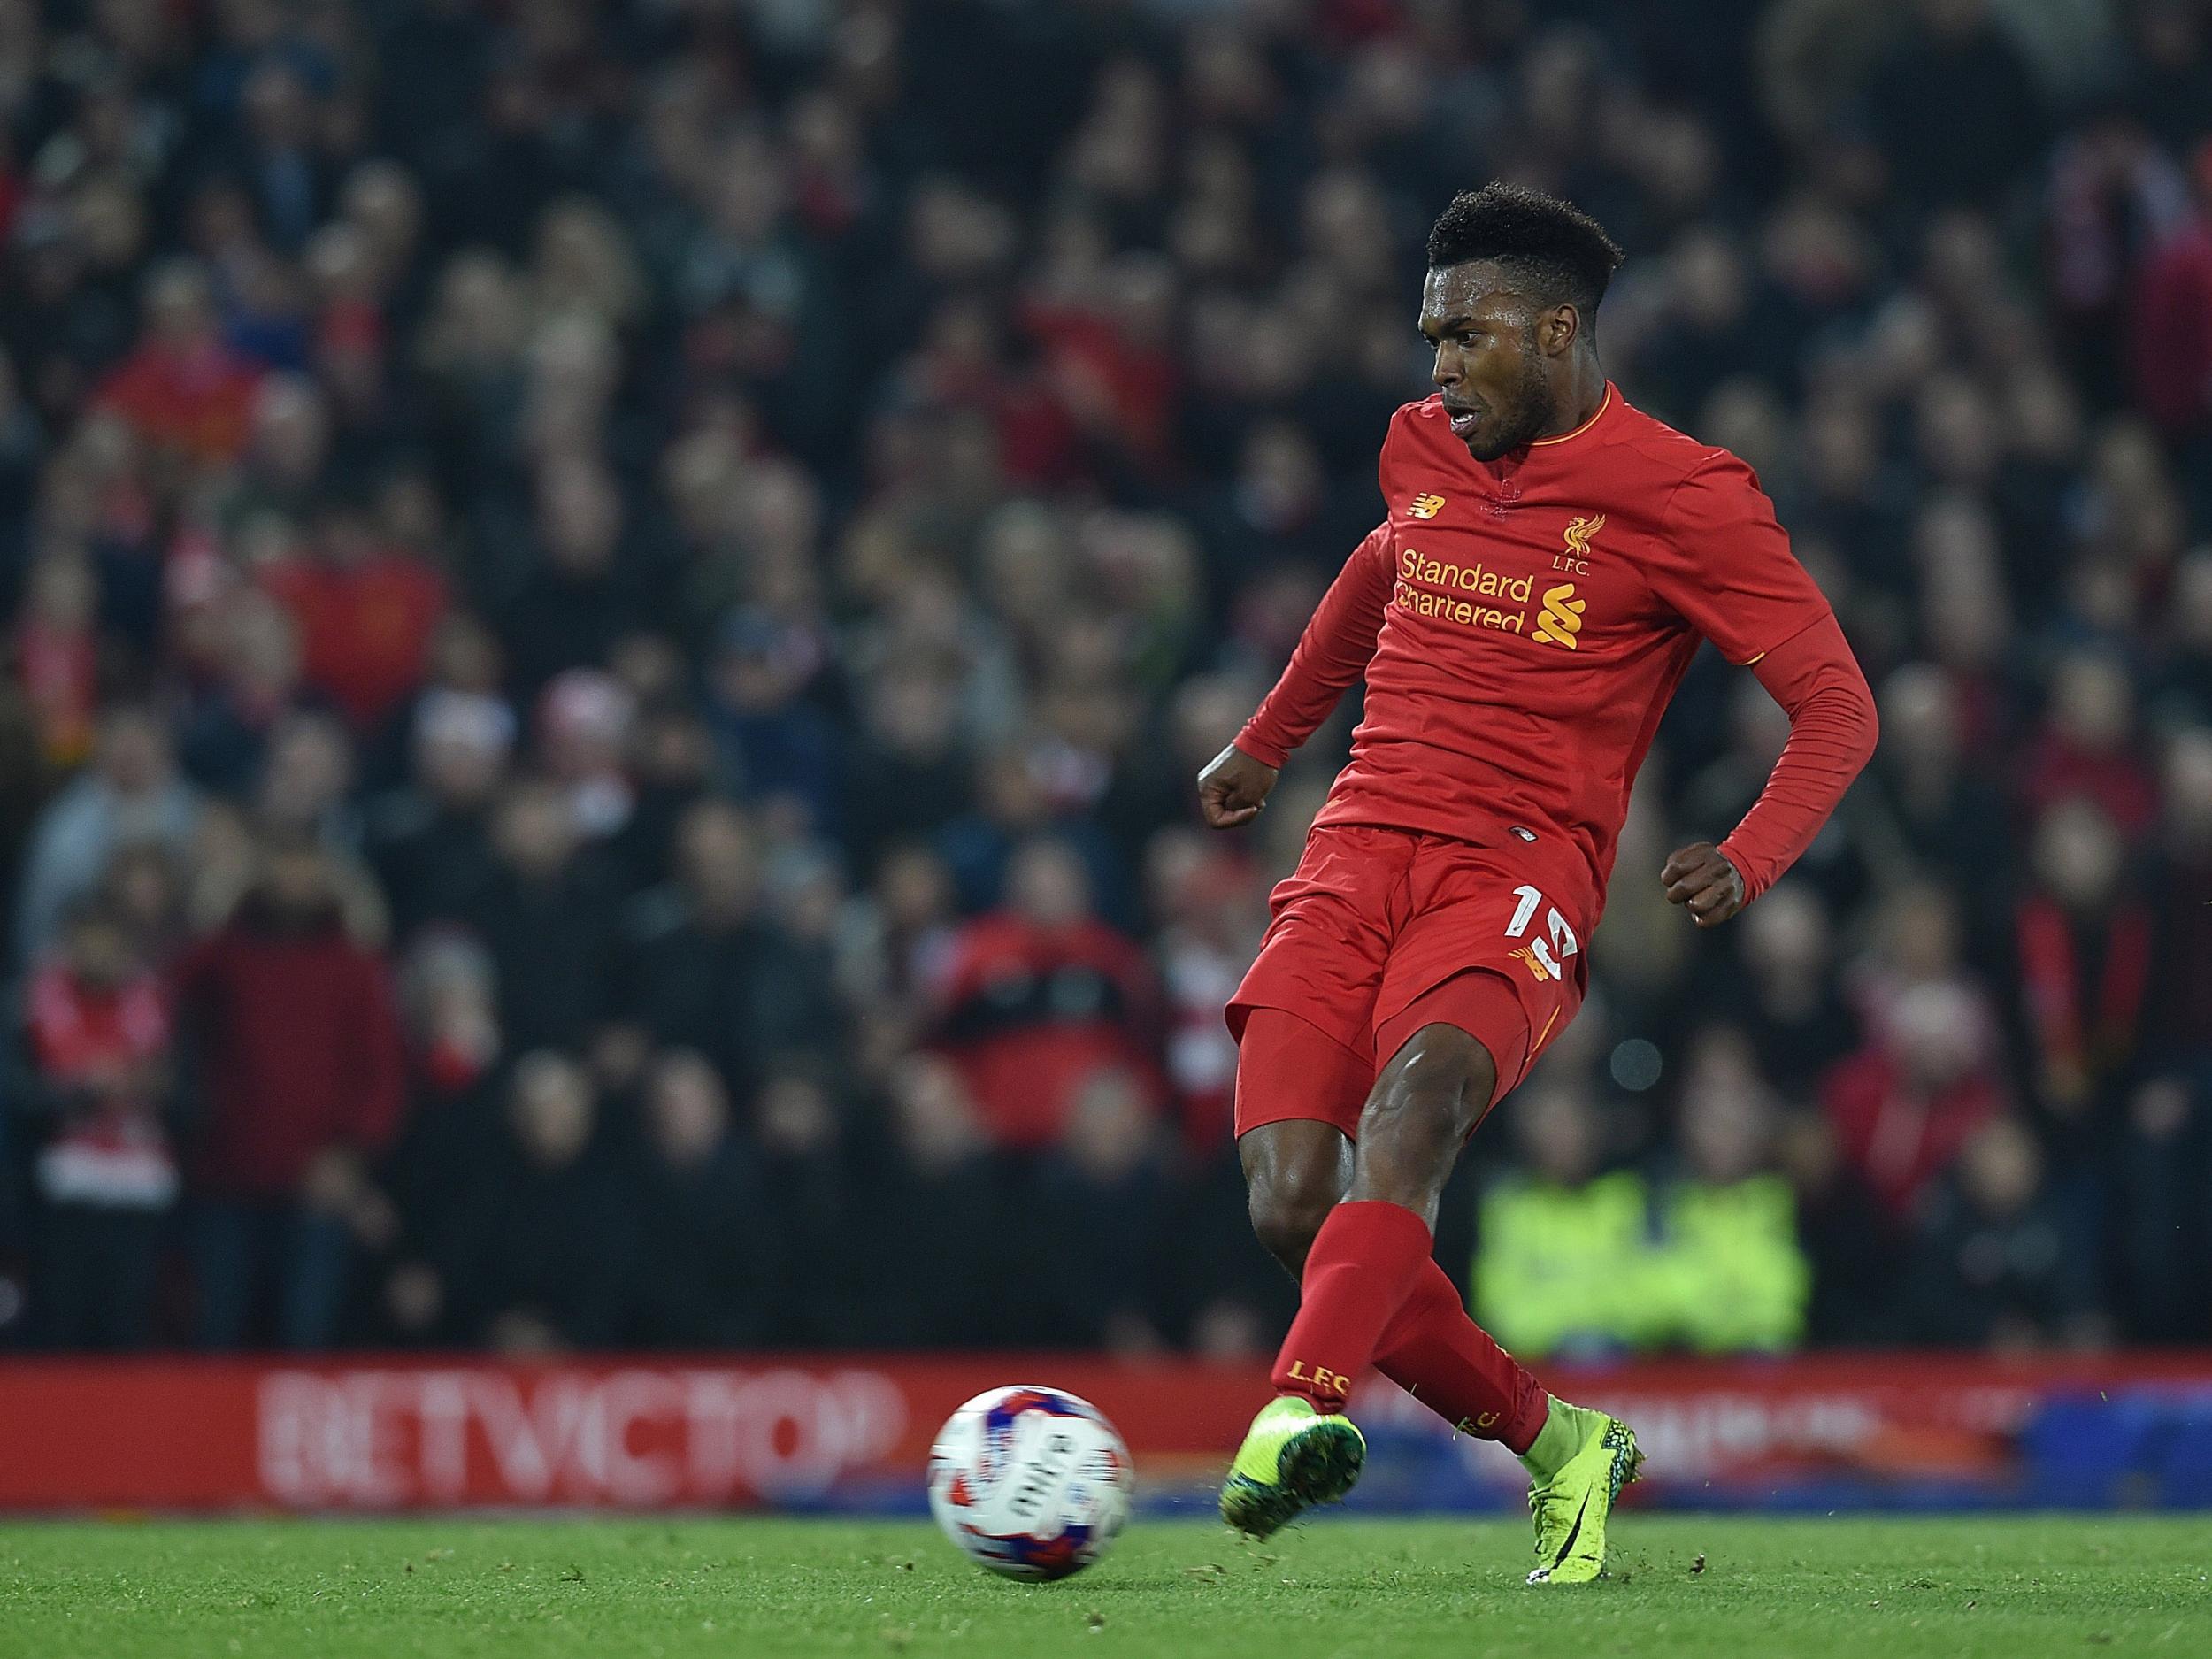 Souness believes Sturridge isn't fit enough for Klopp's style of play